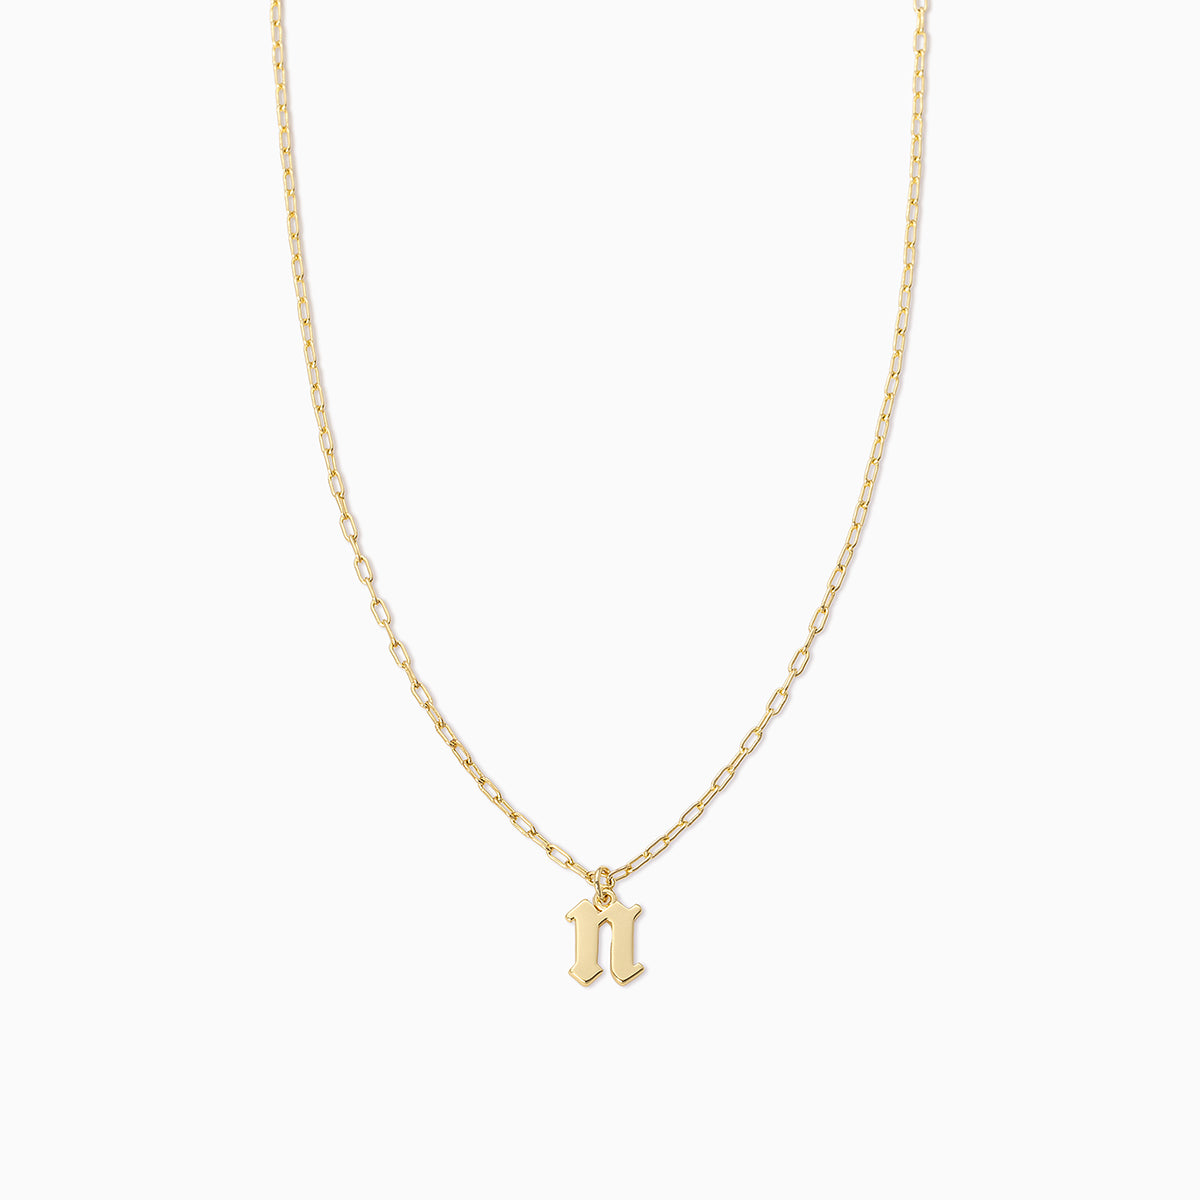 Gothic Initial Pendant Necklace | Gold N | Product Image | Uncommon James